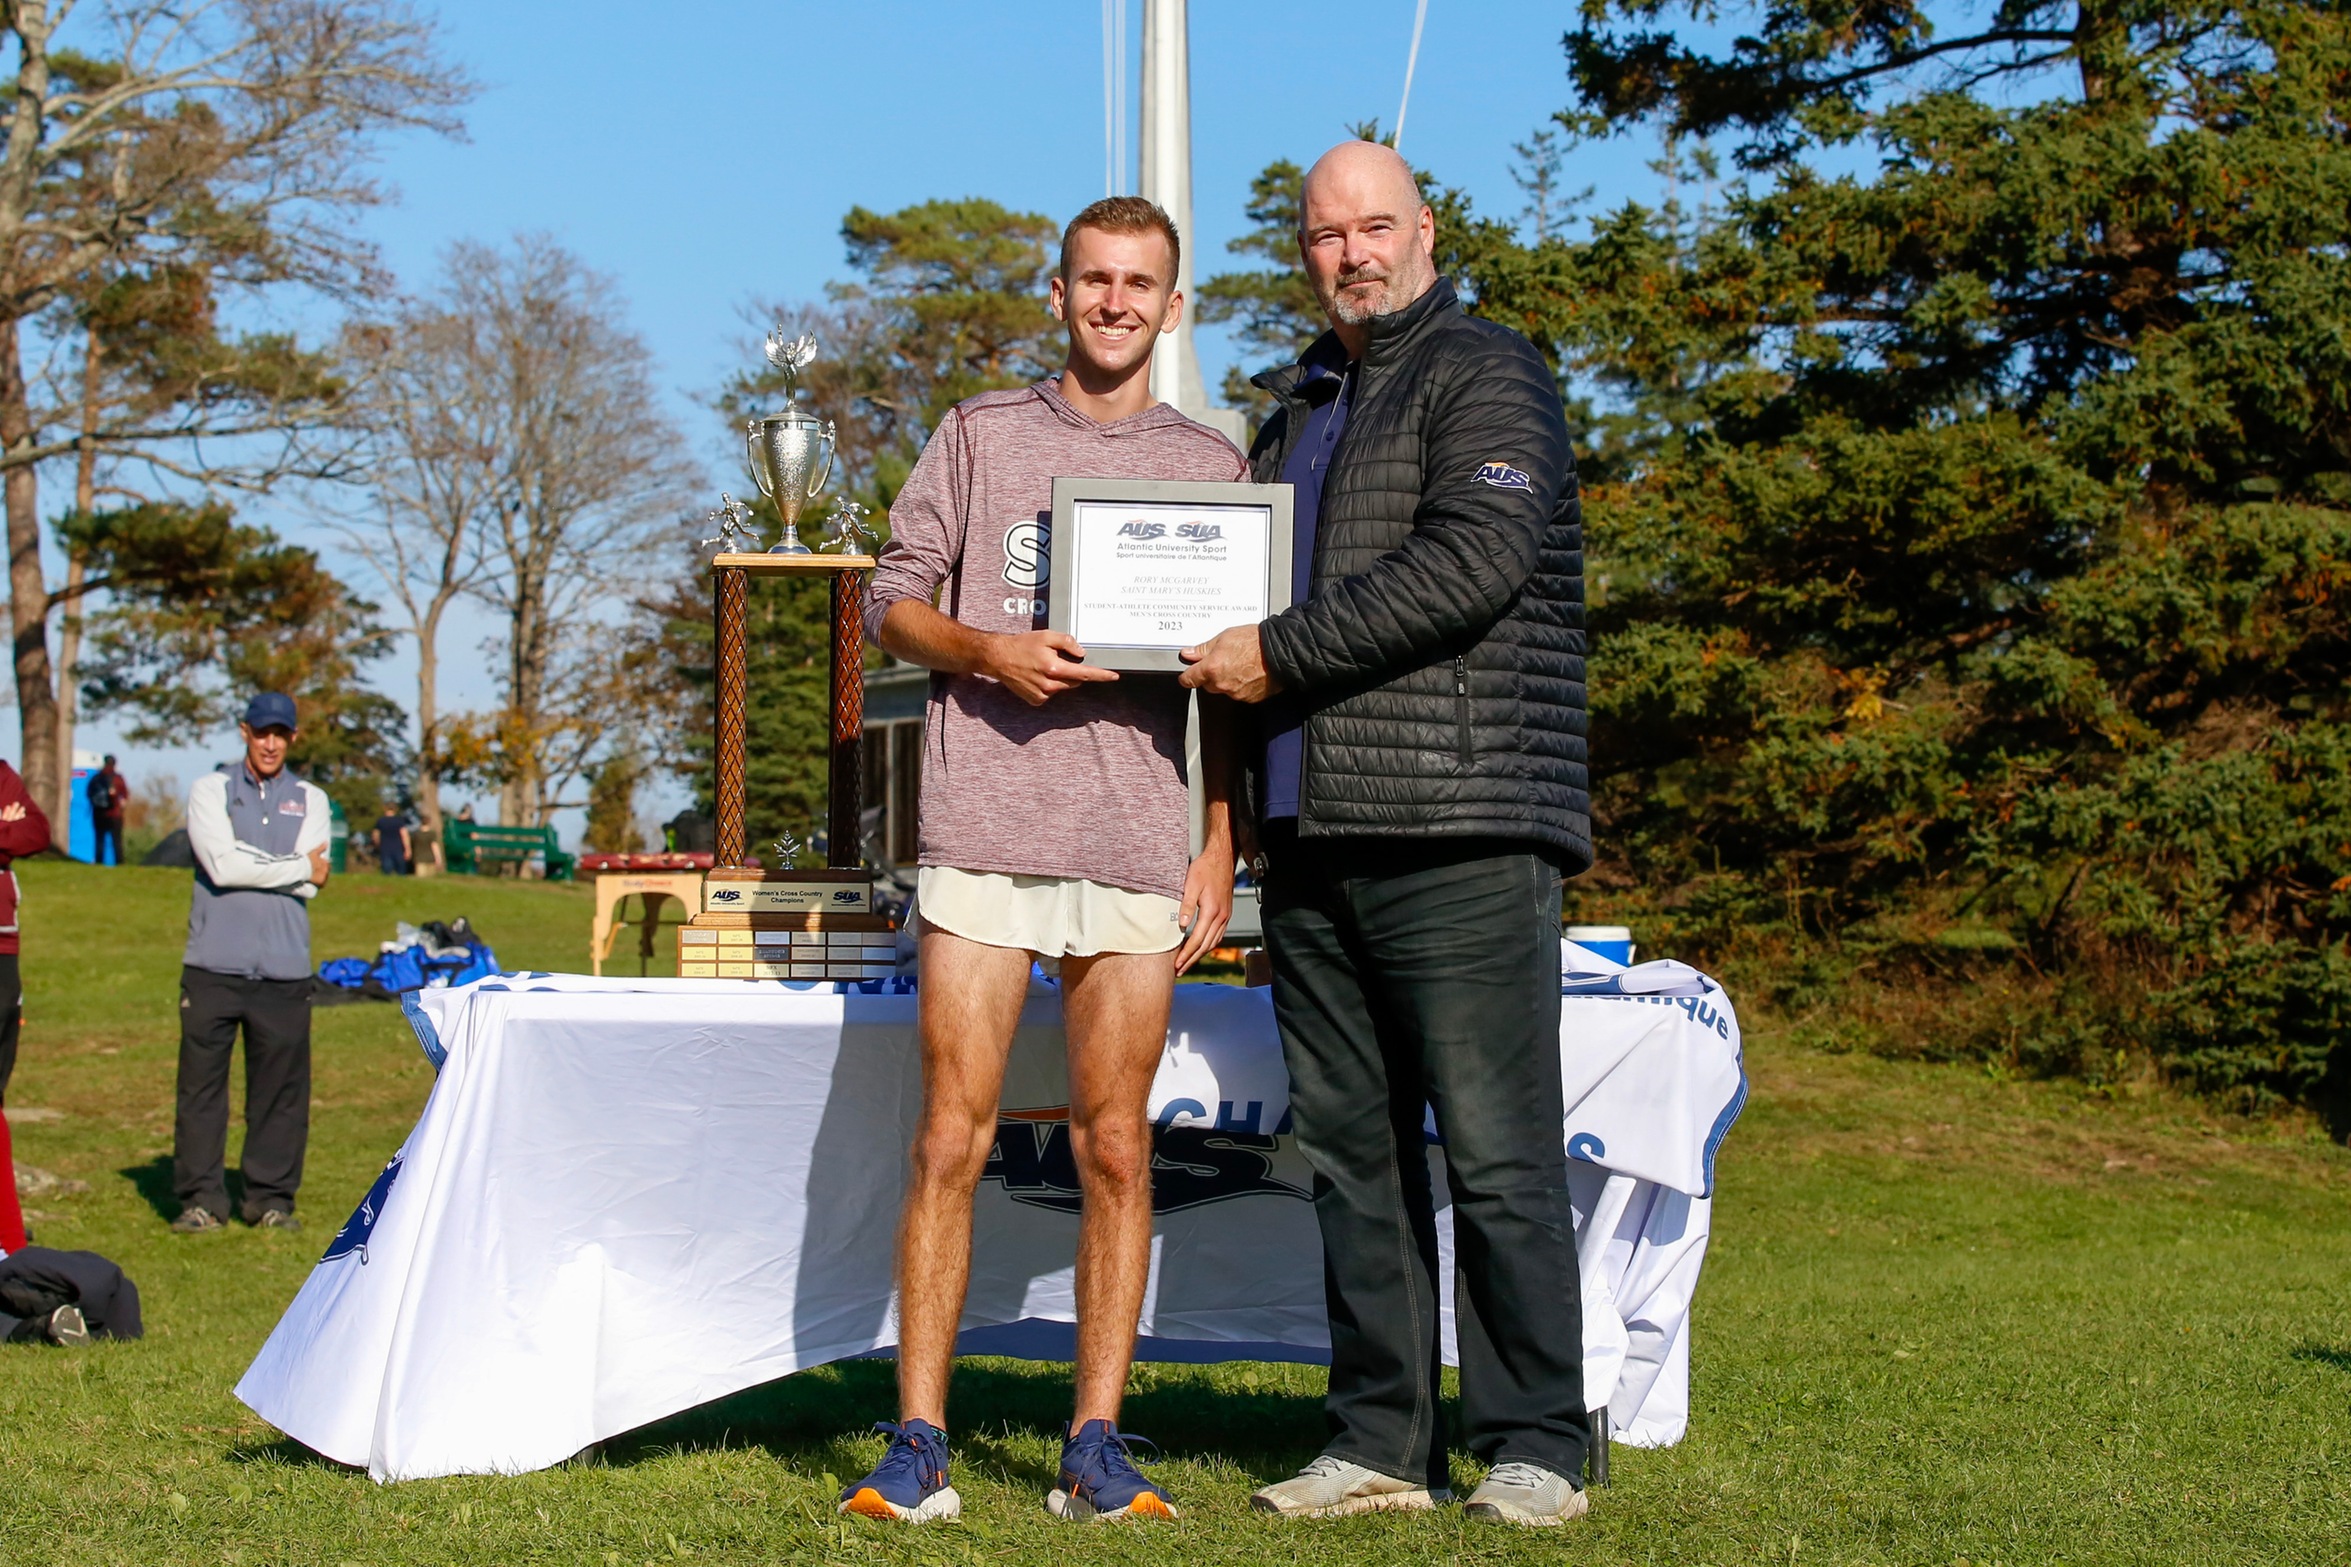 Rory McGarvey honoured with AUS Student -Athlete Community Service Award, First Team All-Star selection